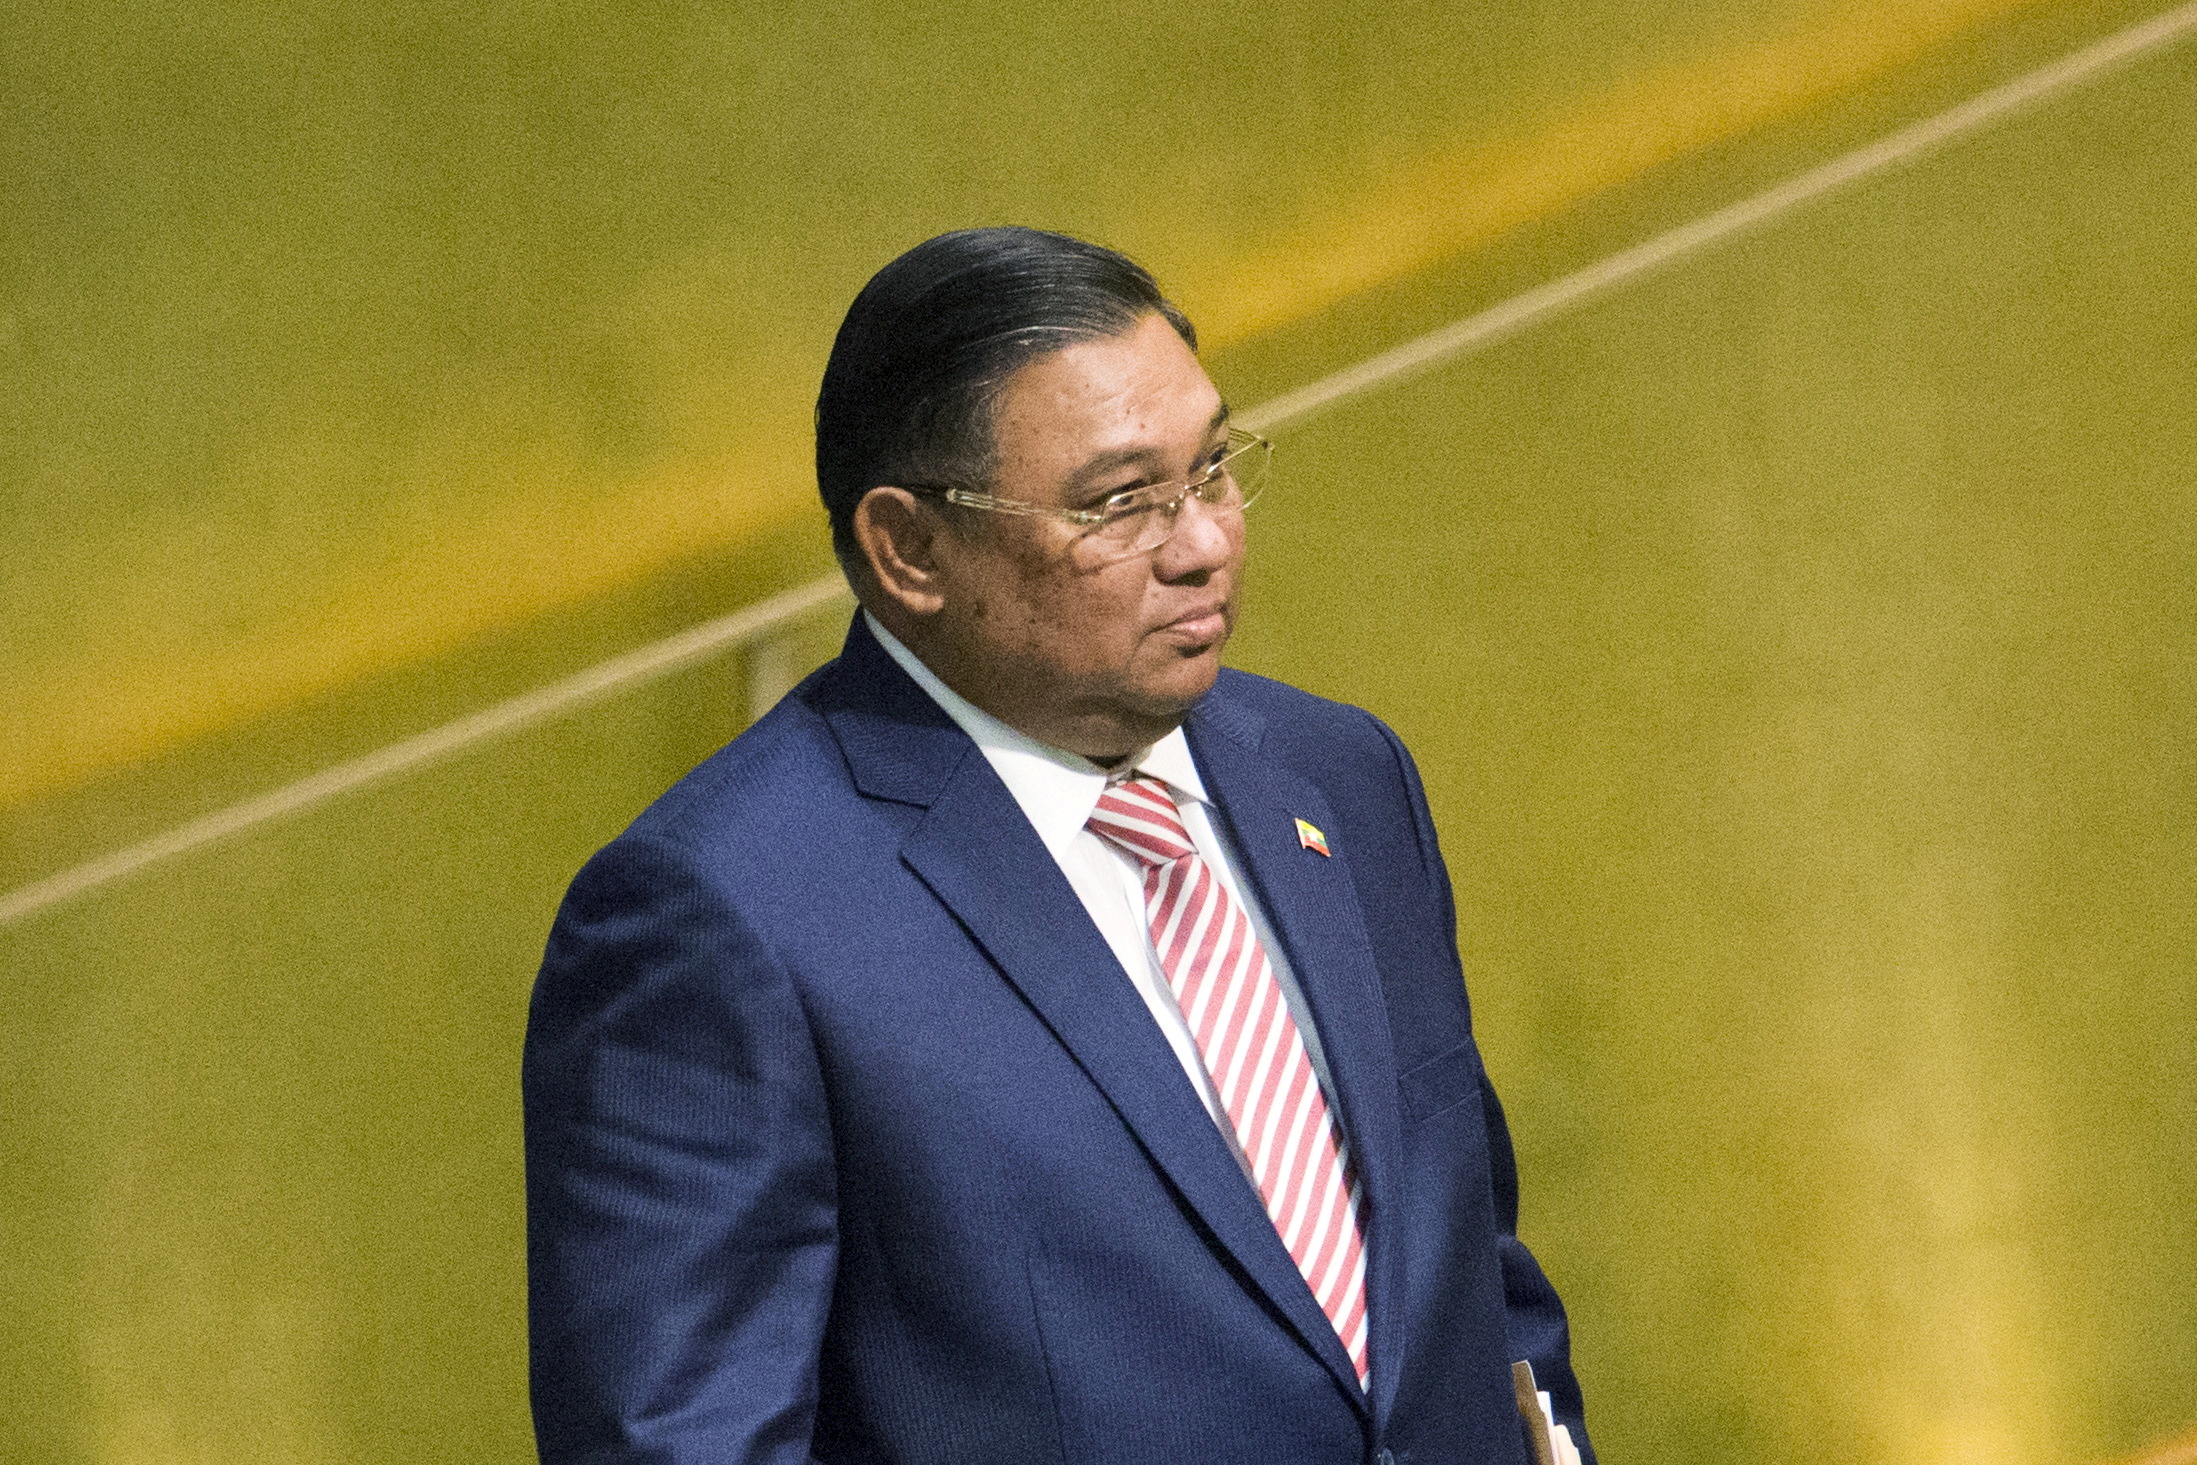 Myanmar's Foreign Minister Lwin arrives to address attendees during the 70th session of the United Nations General Assembly at the U.N. Headquarters in New York